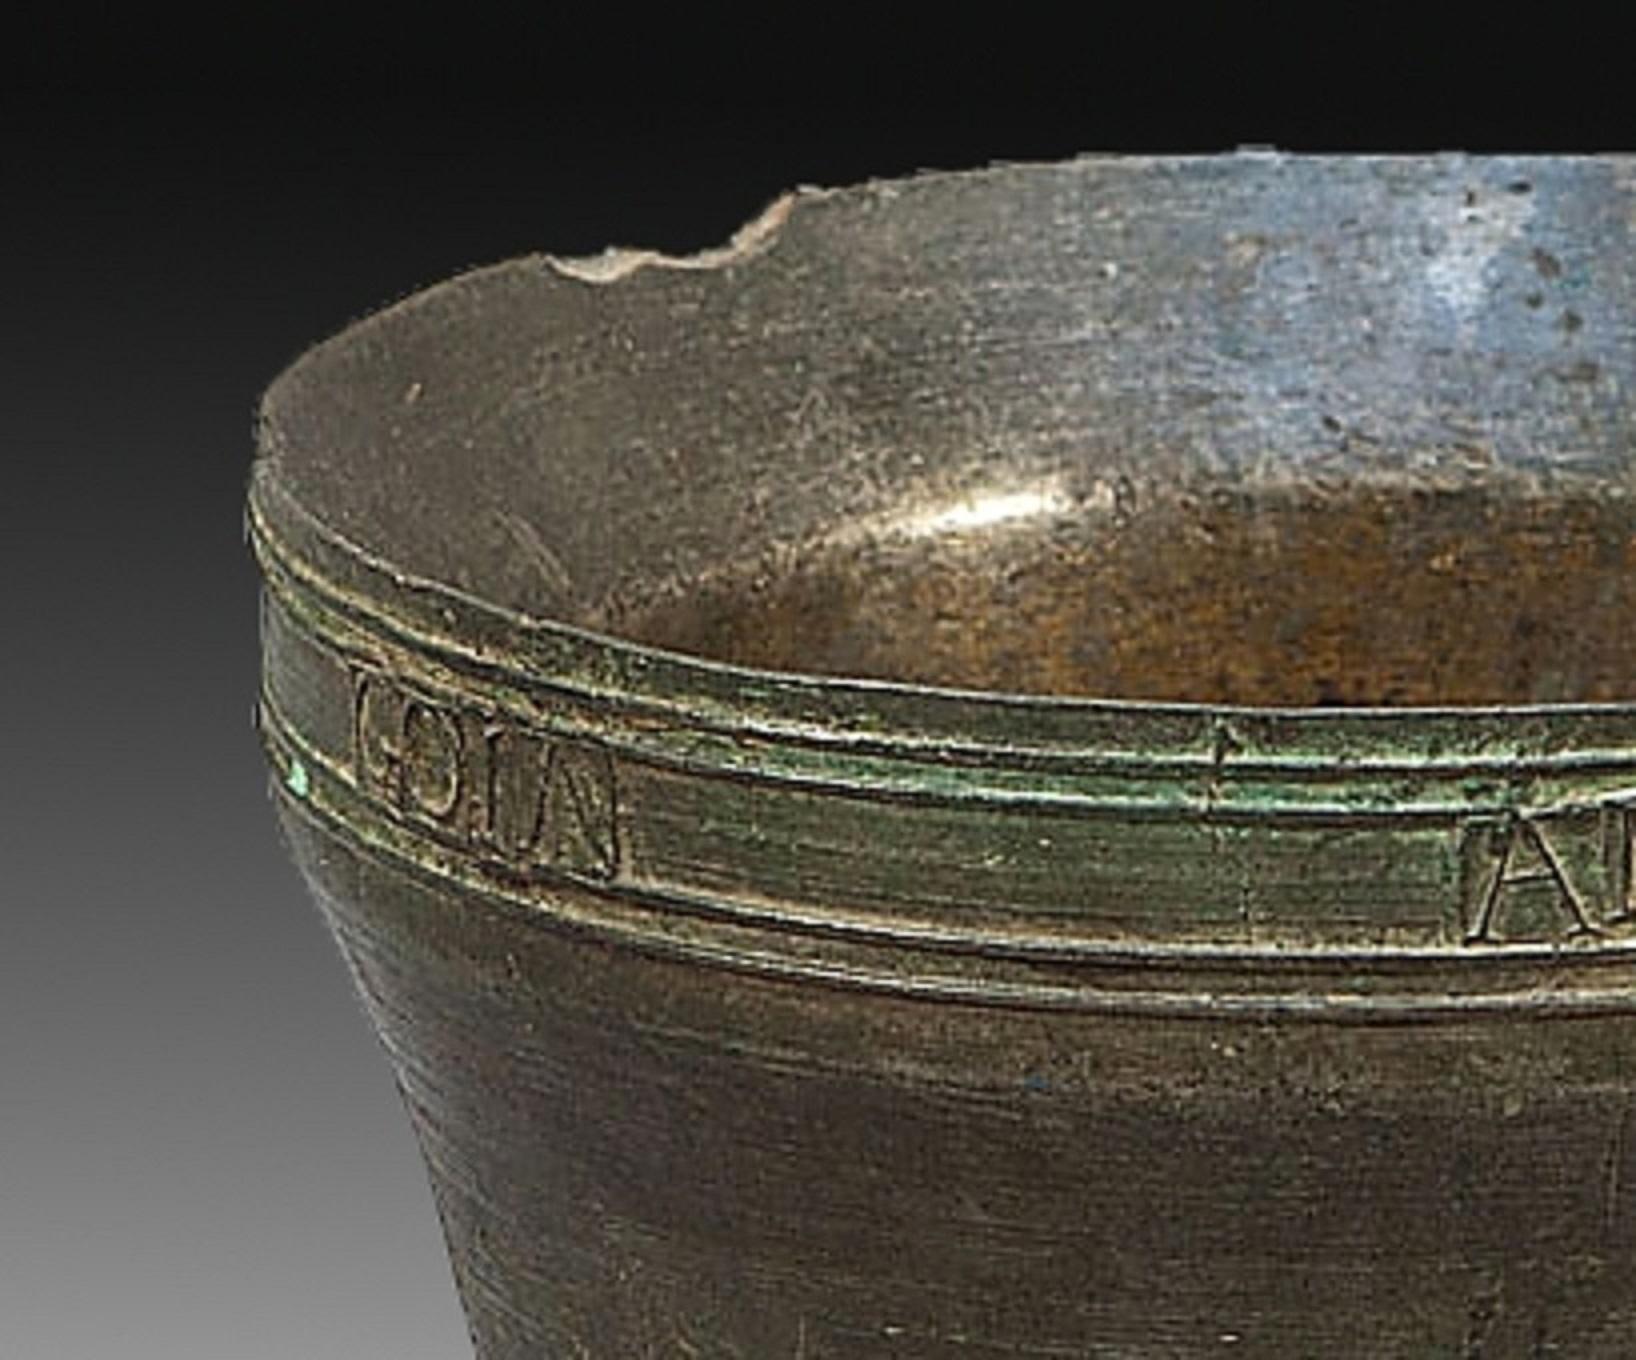 Mortar with inscription. Bronze. Spain, 1846.
Mortar made of bronze with flared mouth and truncated cone body developed without discontinuity and decreasing in diameter to the base. The piece presents an inscription (